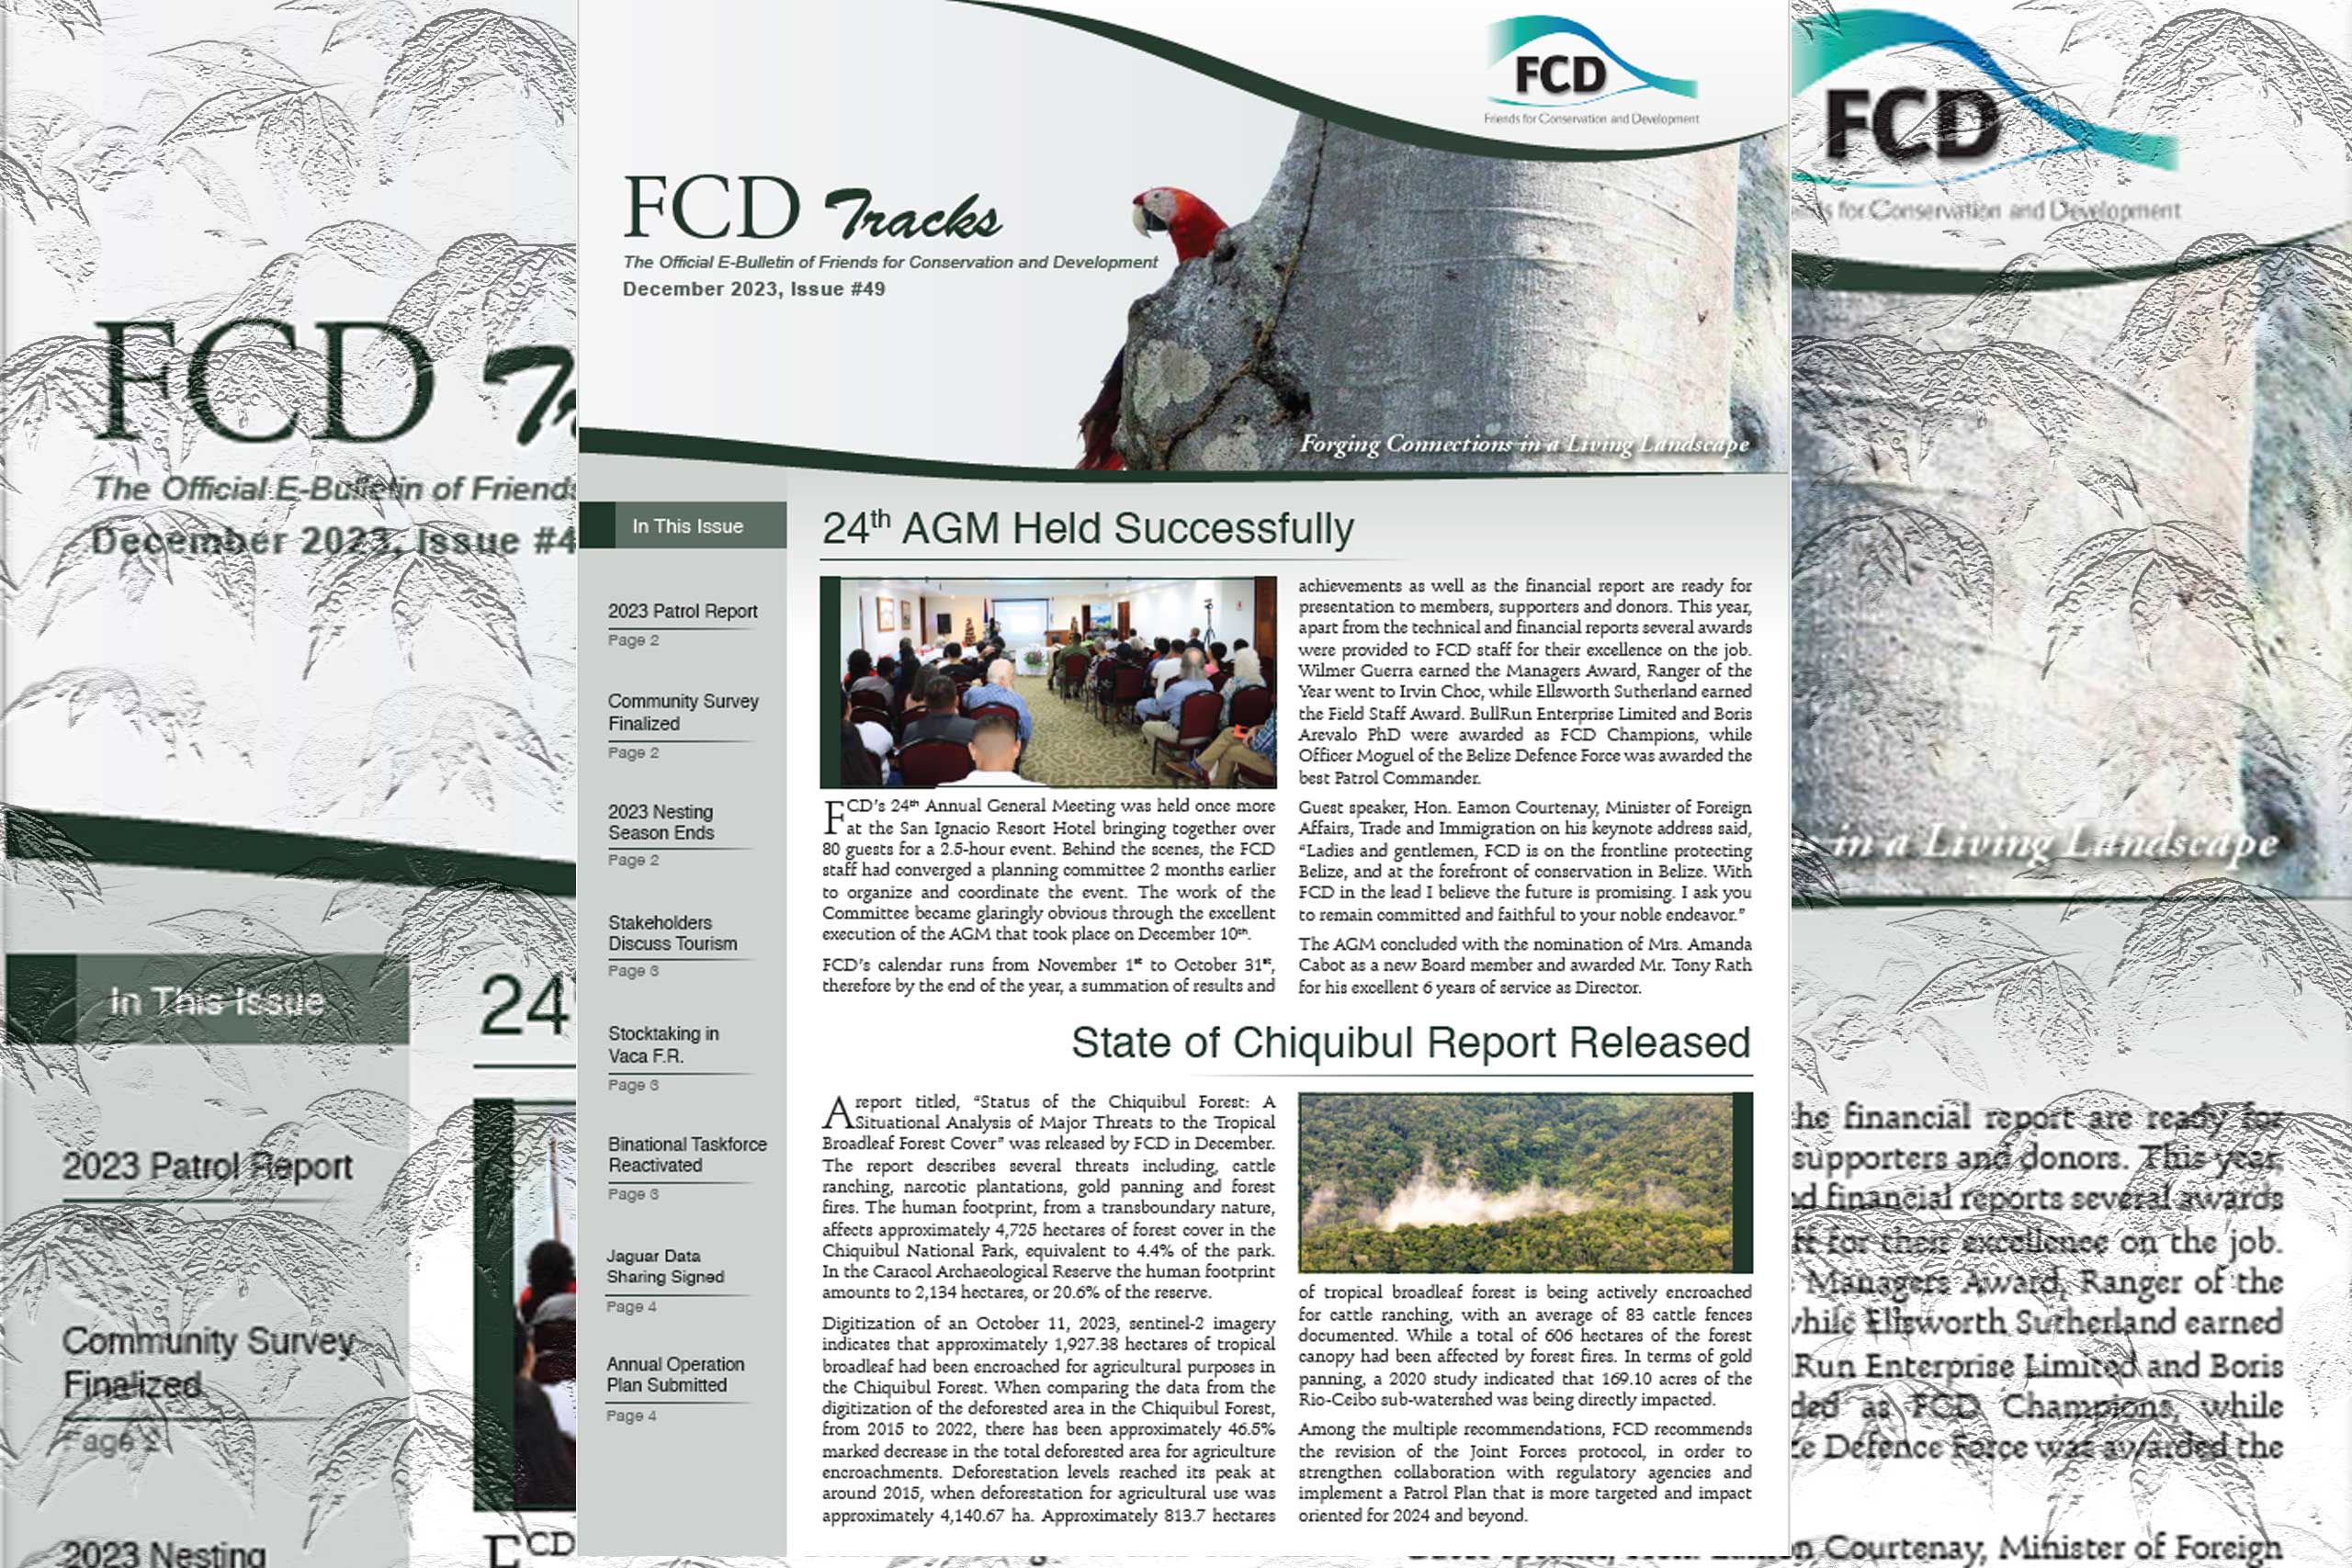 The latest edition of FCD’s Newsletter, Issue #49, has been released.